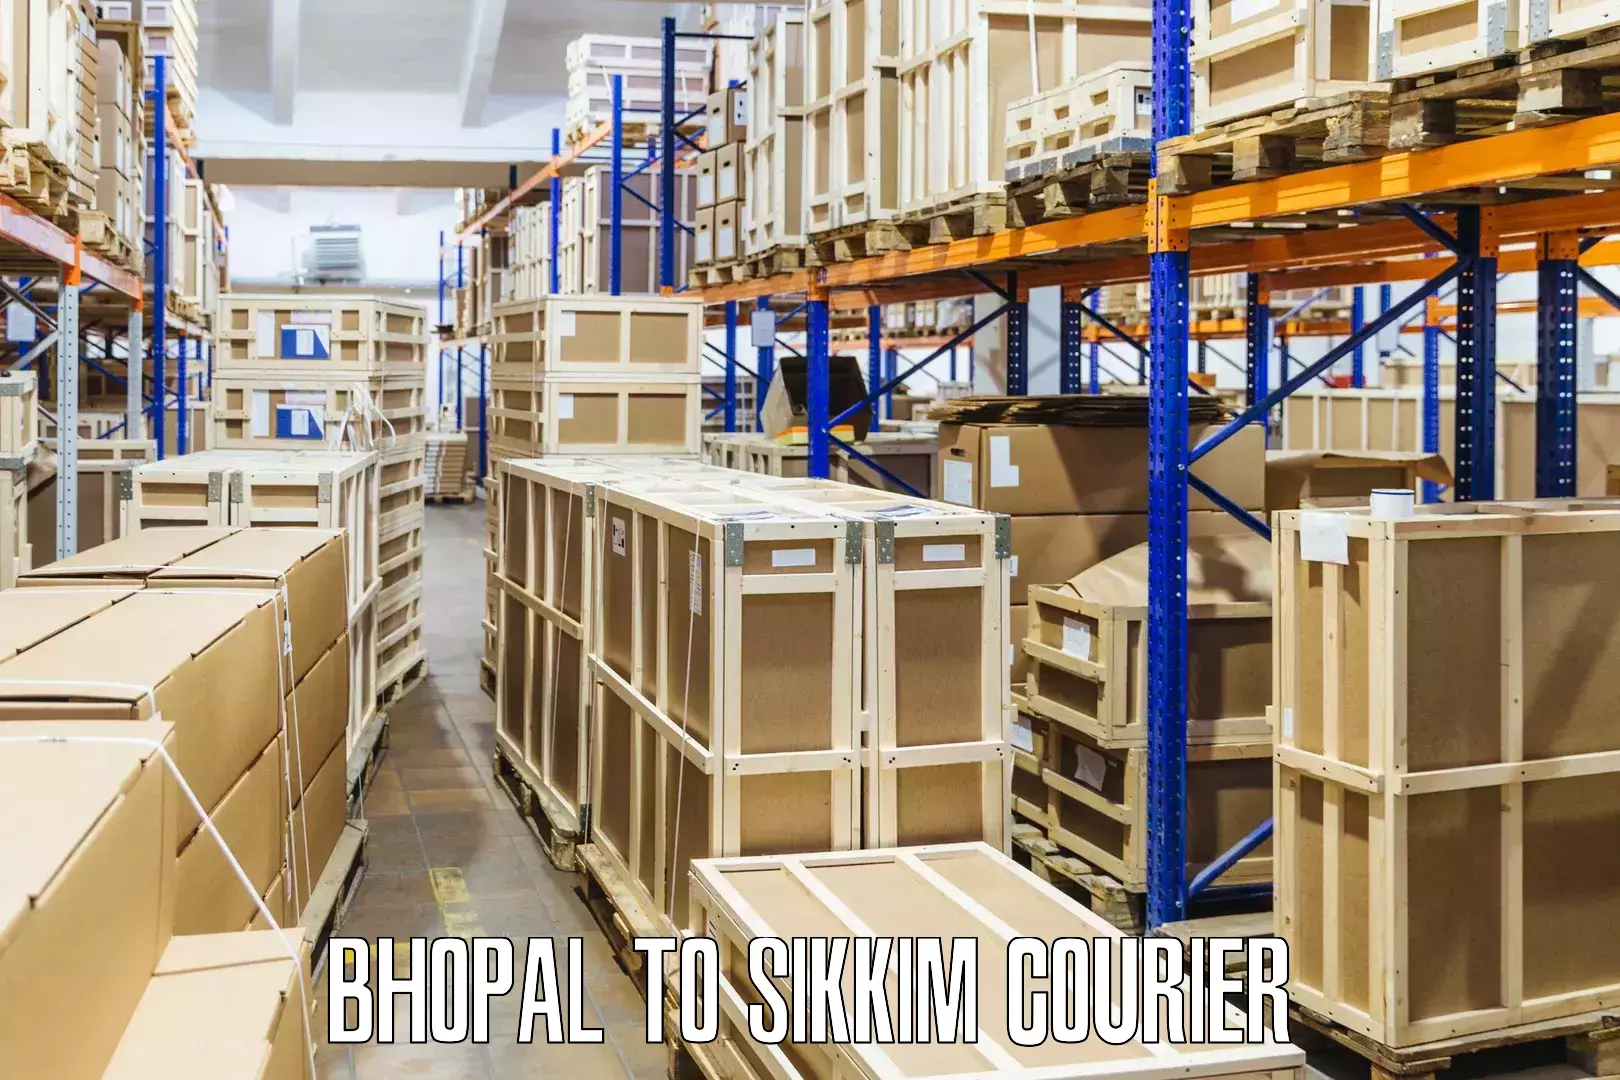 Professional courier handling Bhopal to Pelling